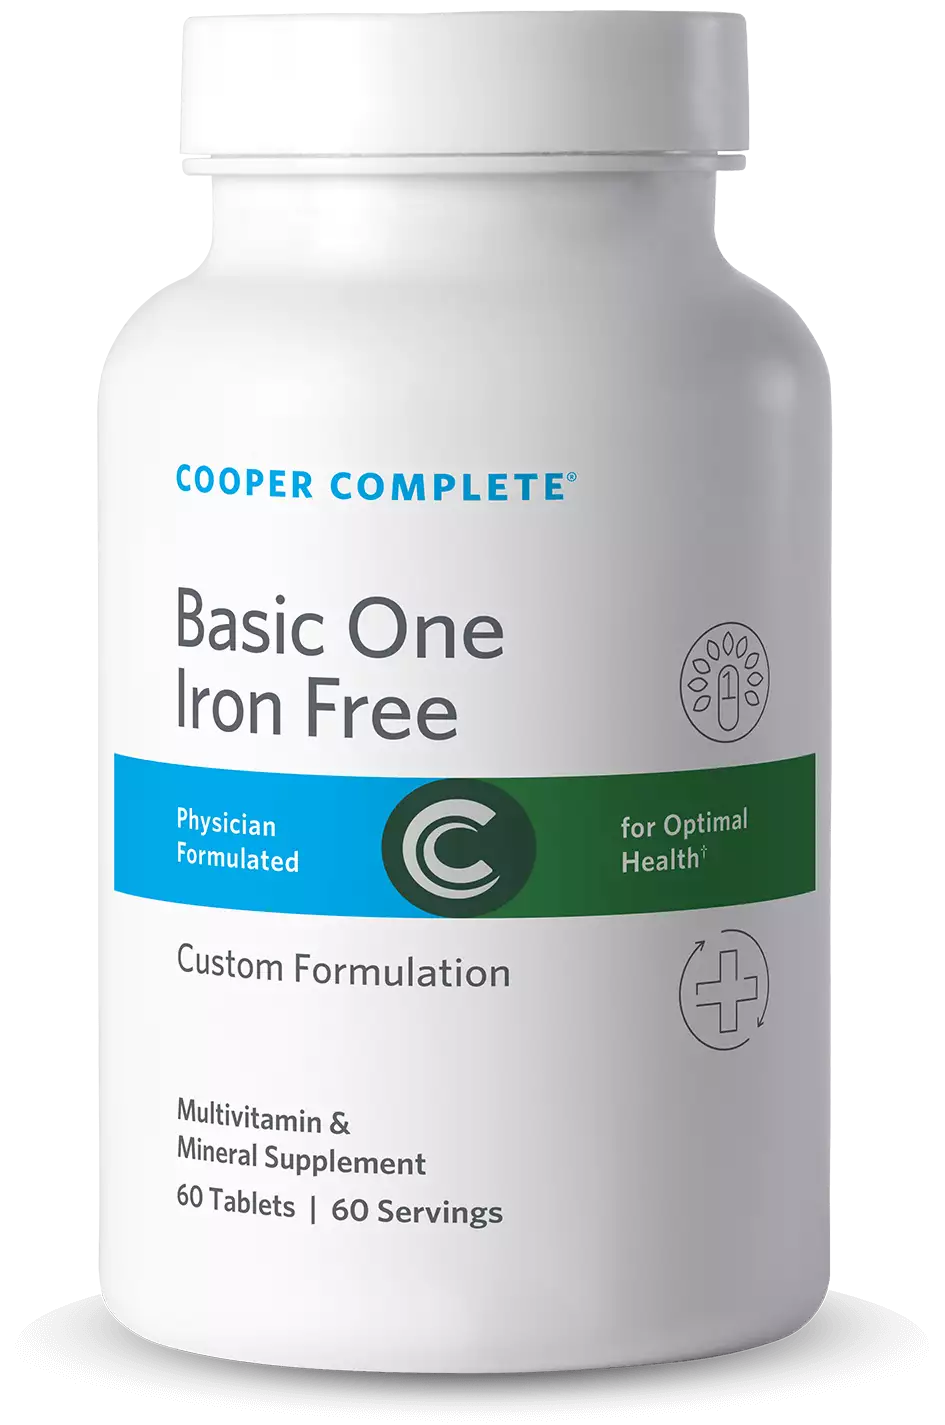 Photo of Cooper Complete Basic One Daily Multivitamin Iron Free bottle.